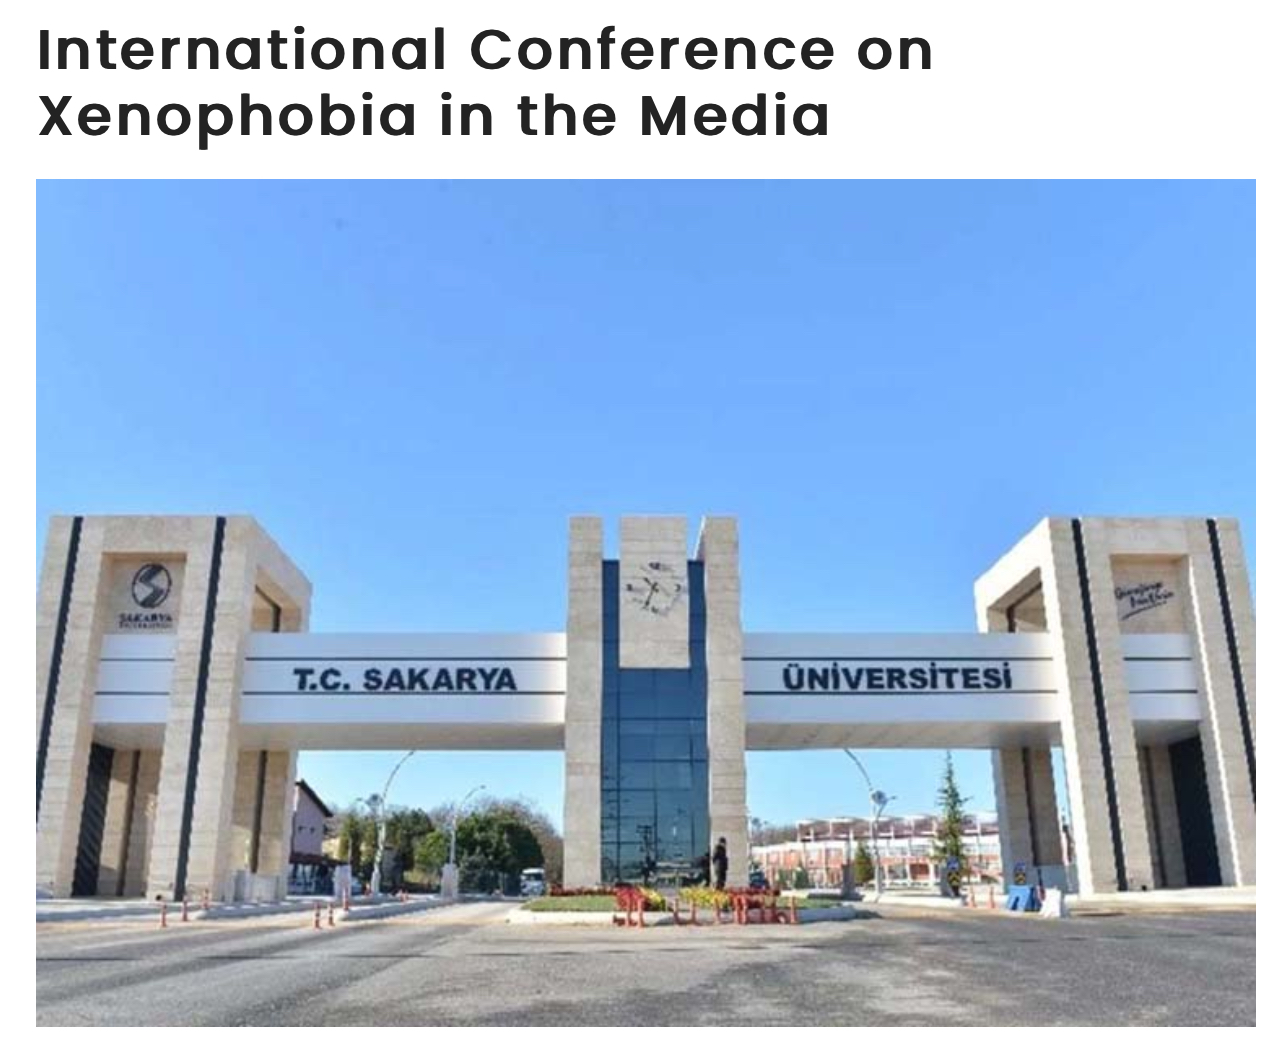 Call for Papers: International Conference on Xenophobia in the Media